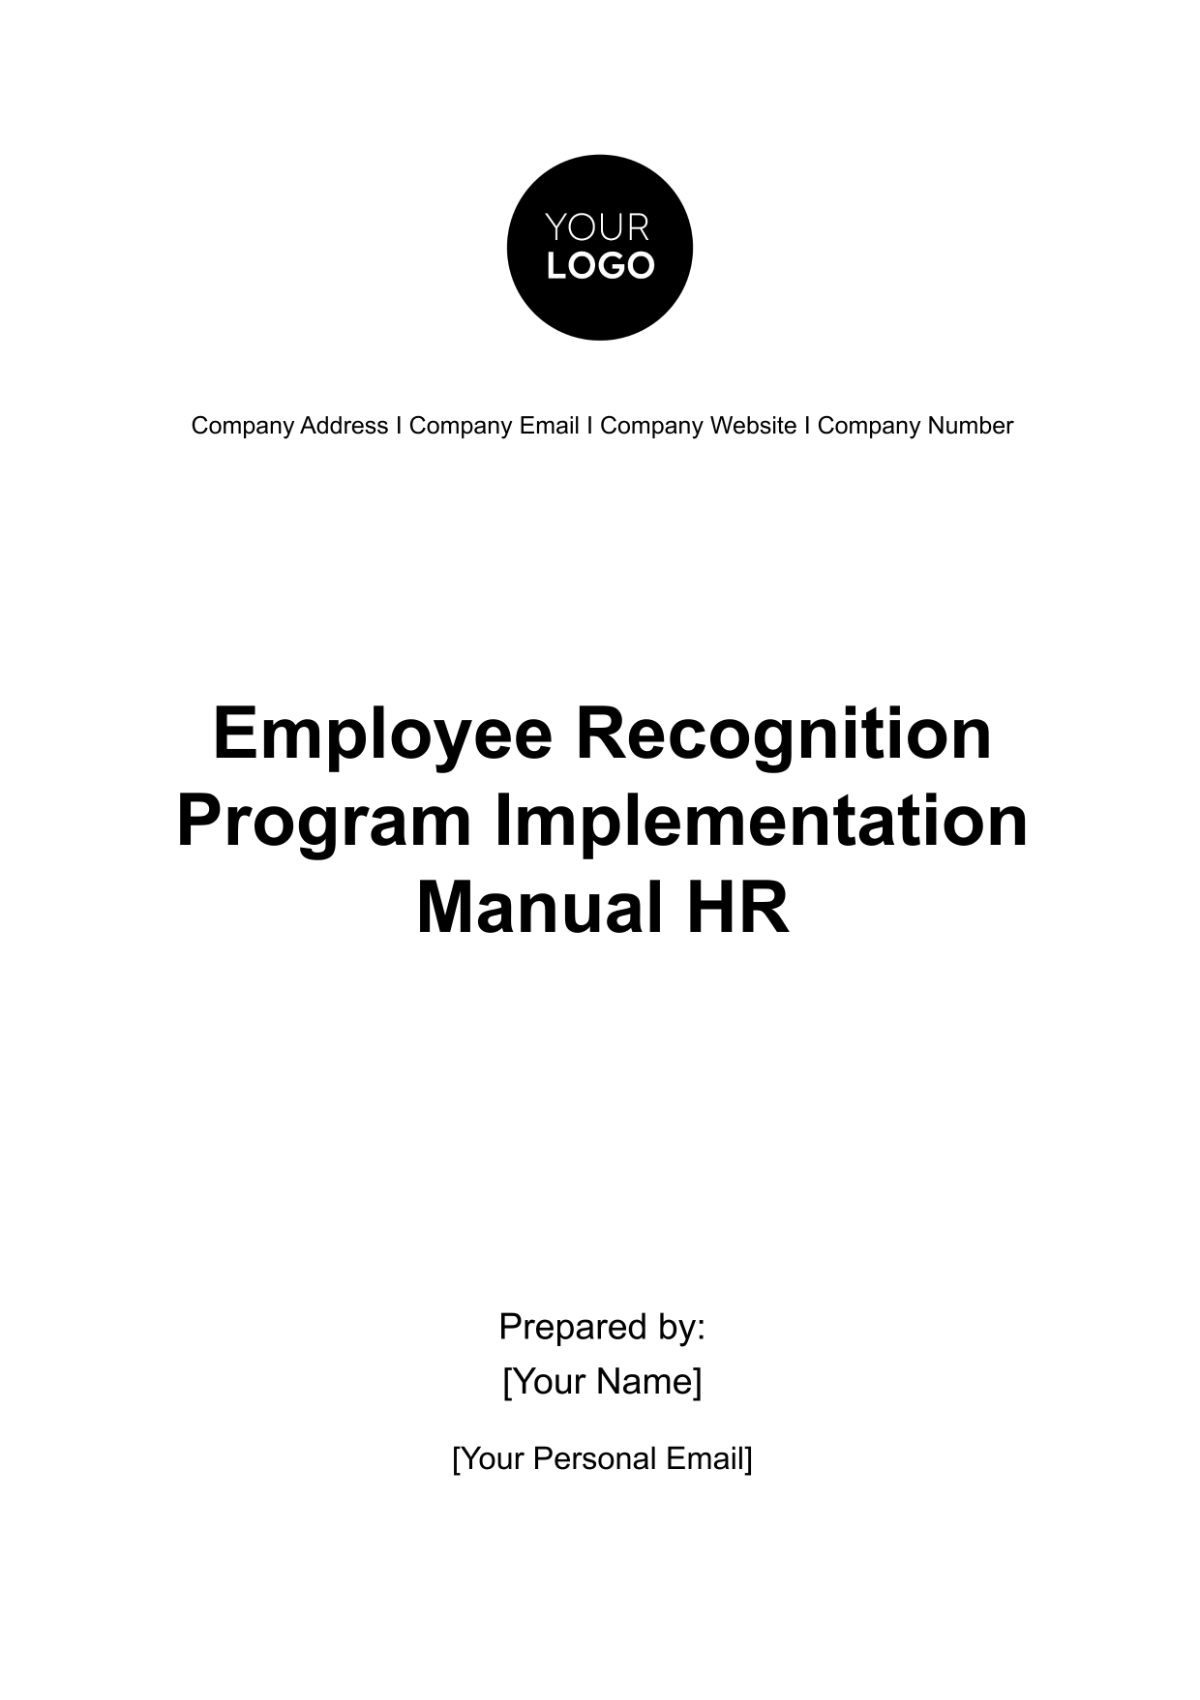 Free Employee Recognition Program Implementation Manual HR Template